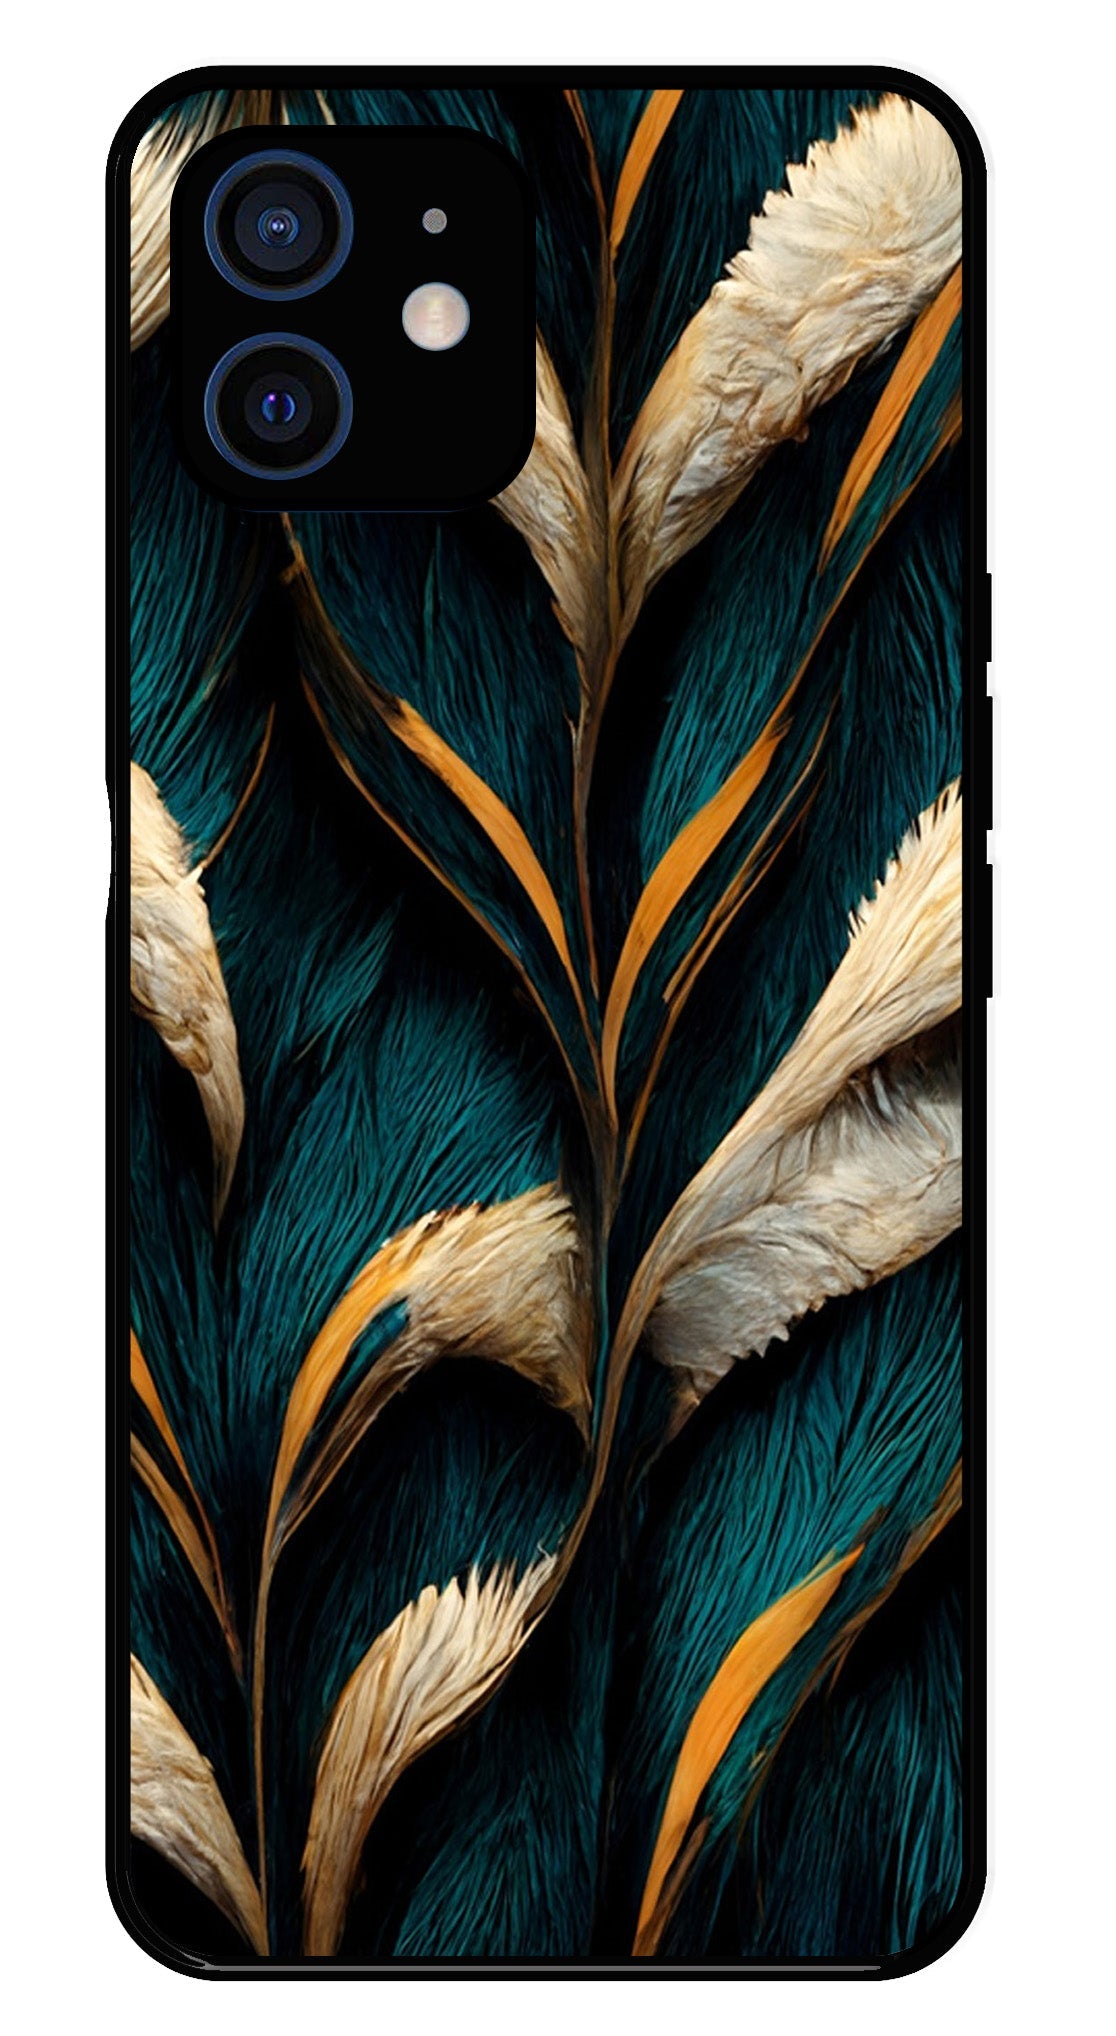 Feathers Metal Mobile Case for iPhone 11